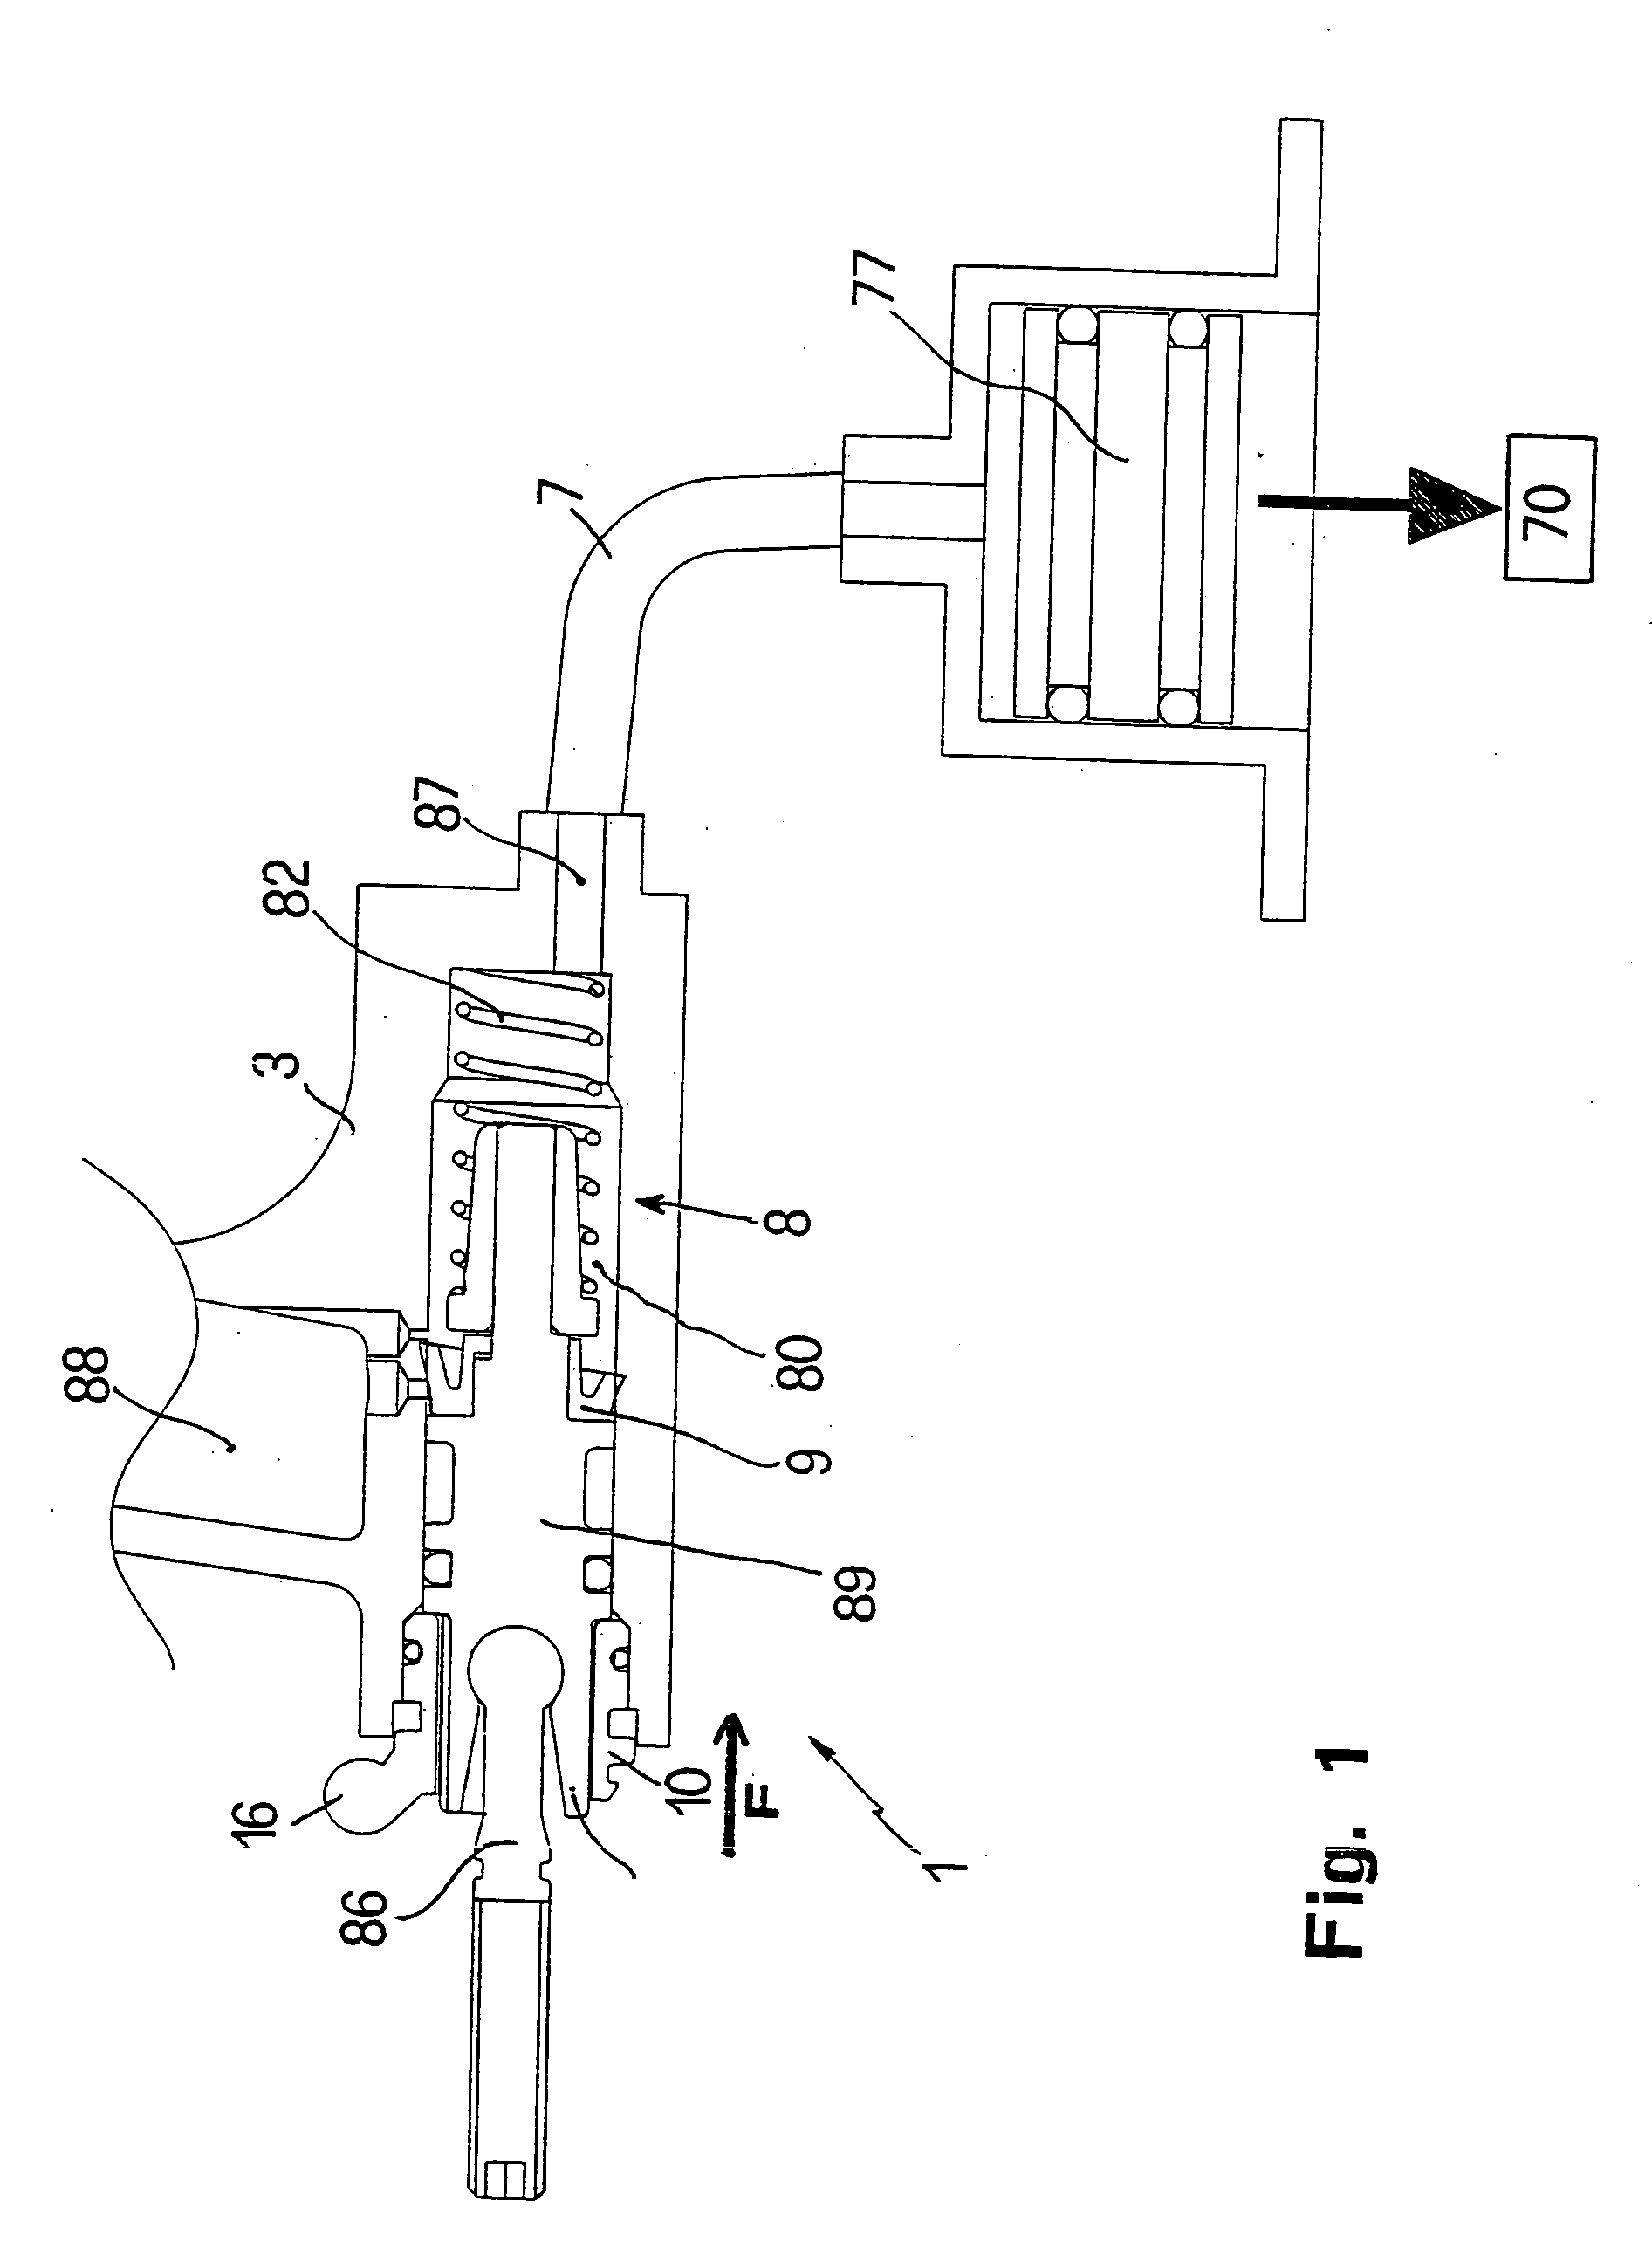 Apparatus for controlling a hydraulic circuit for clutches